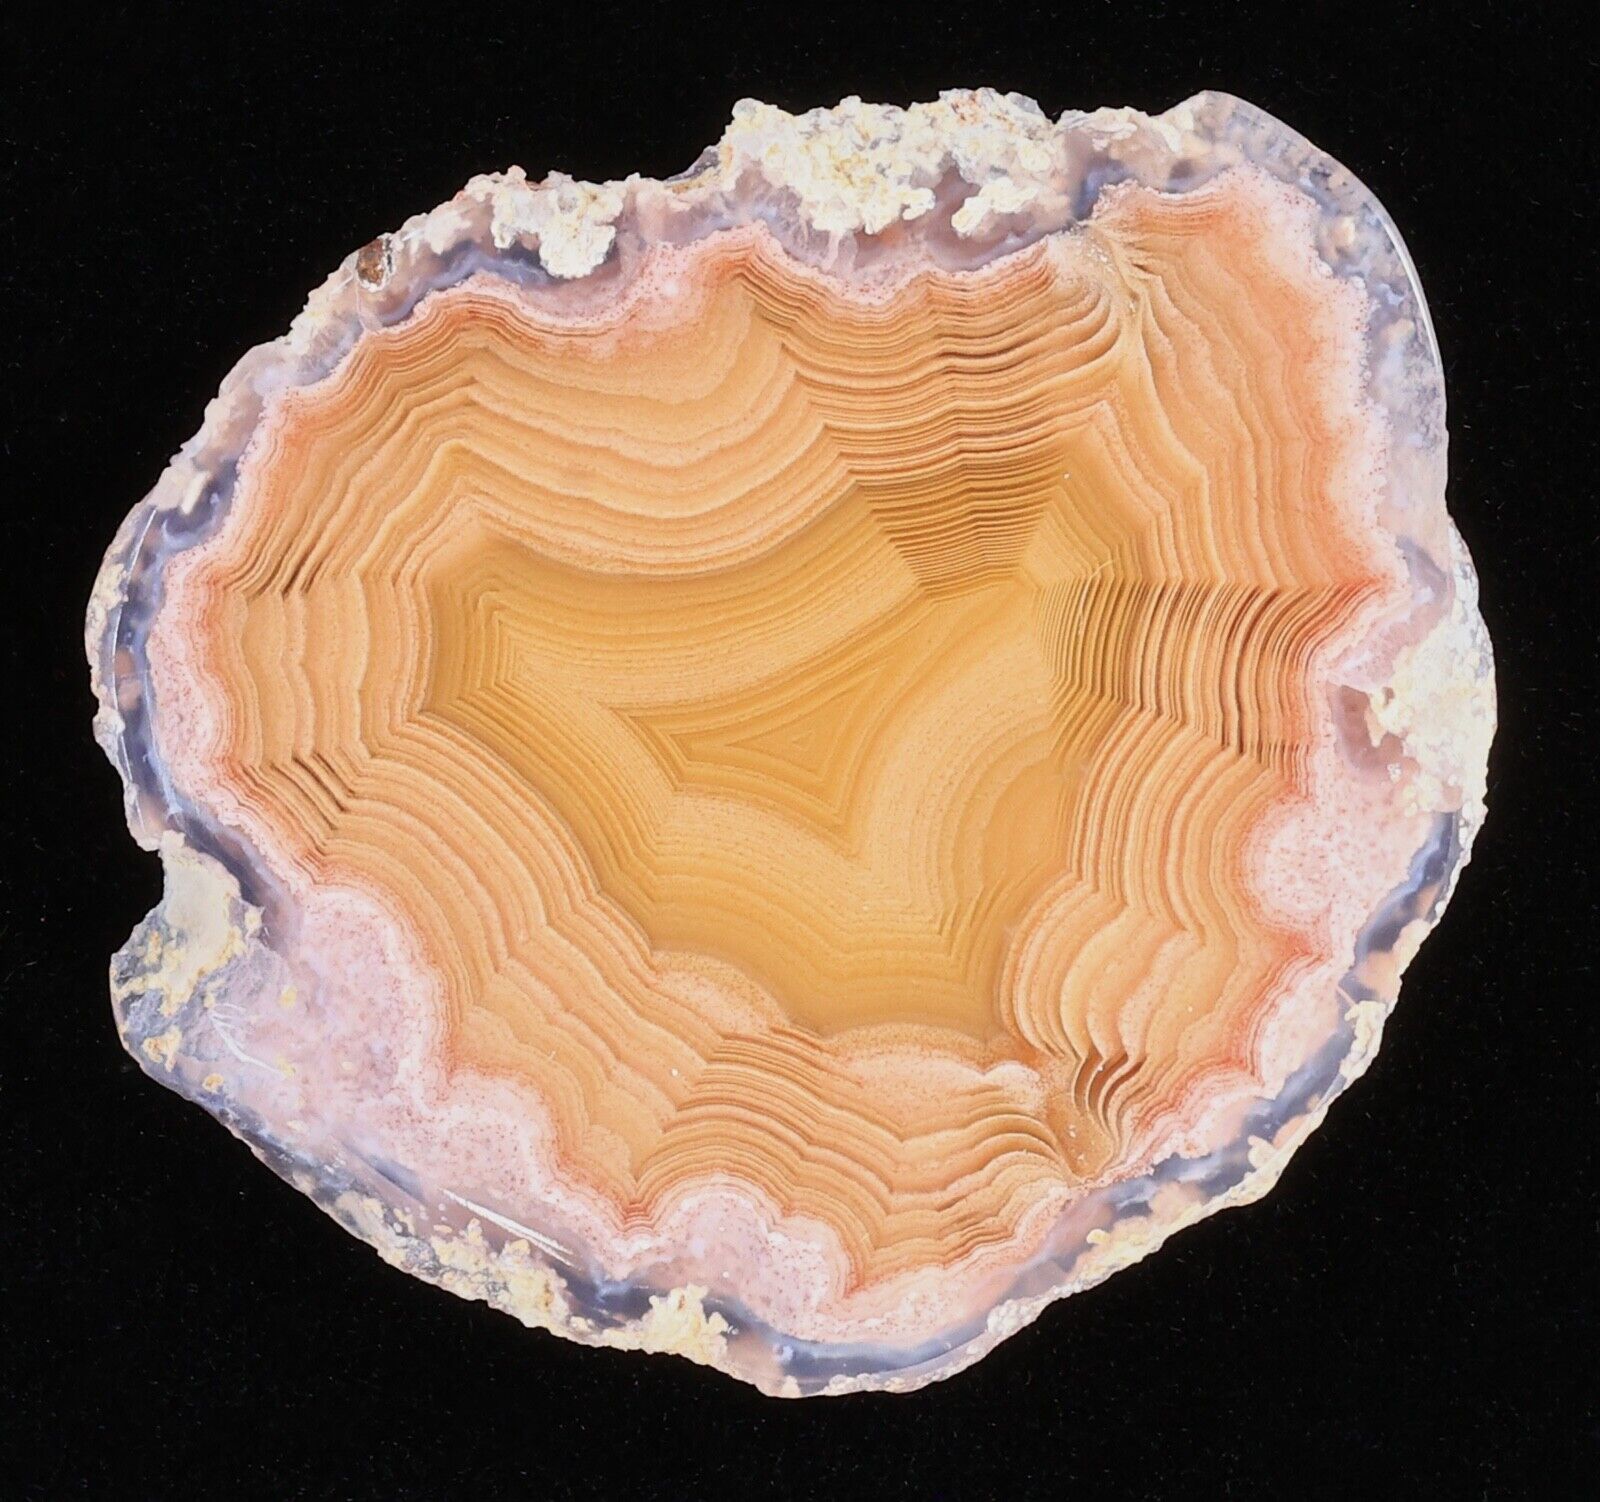 Gorgeous Little Laguna Agate Slice with amazing patterns and parallax